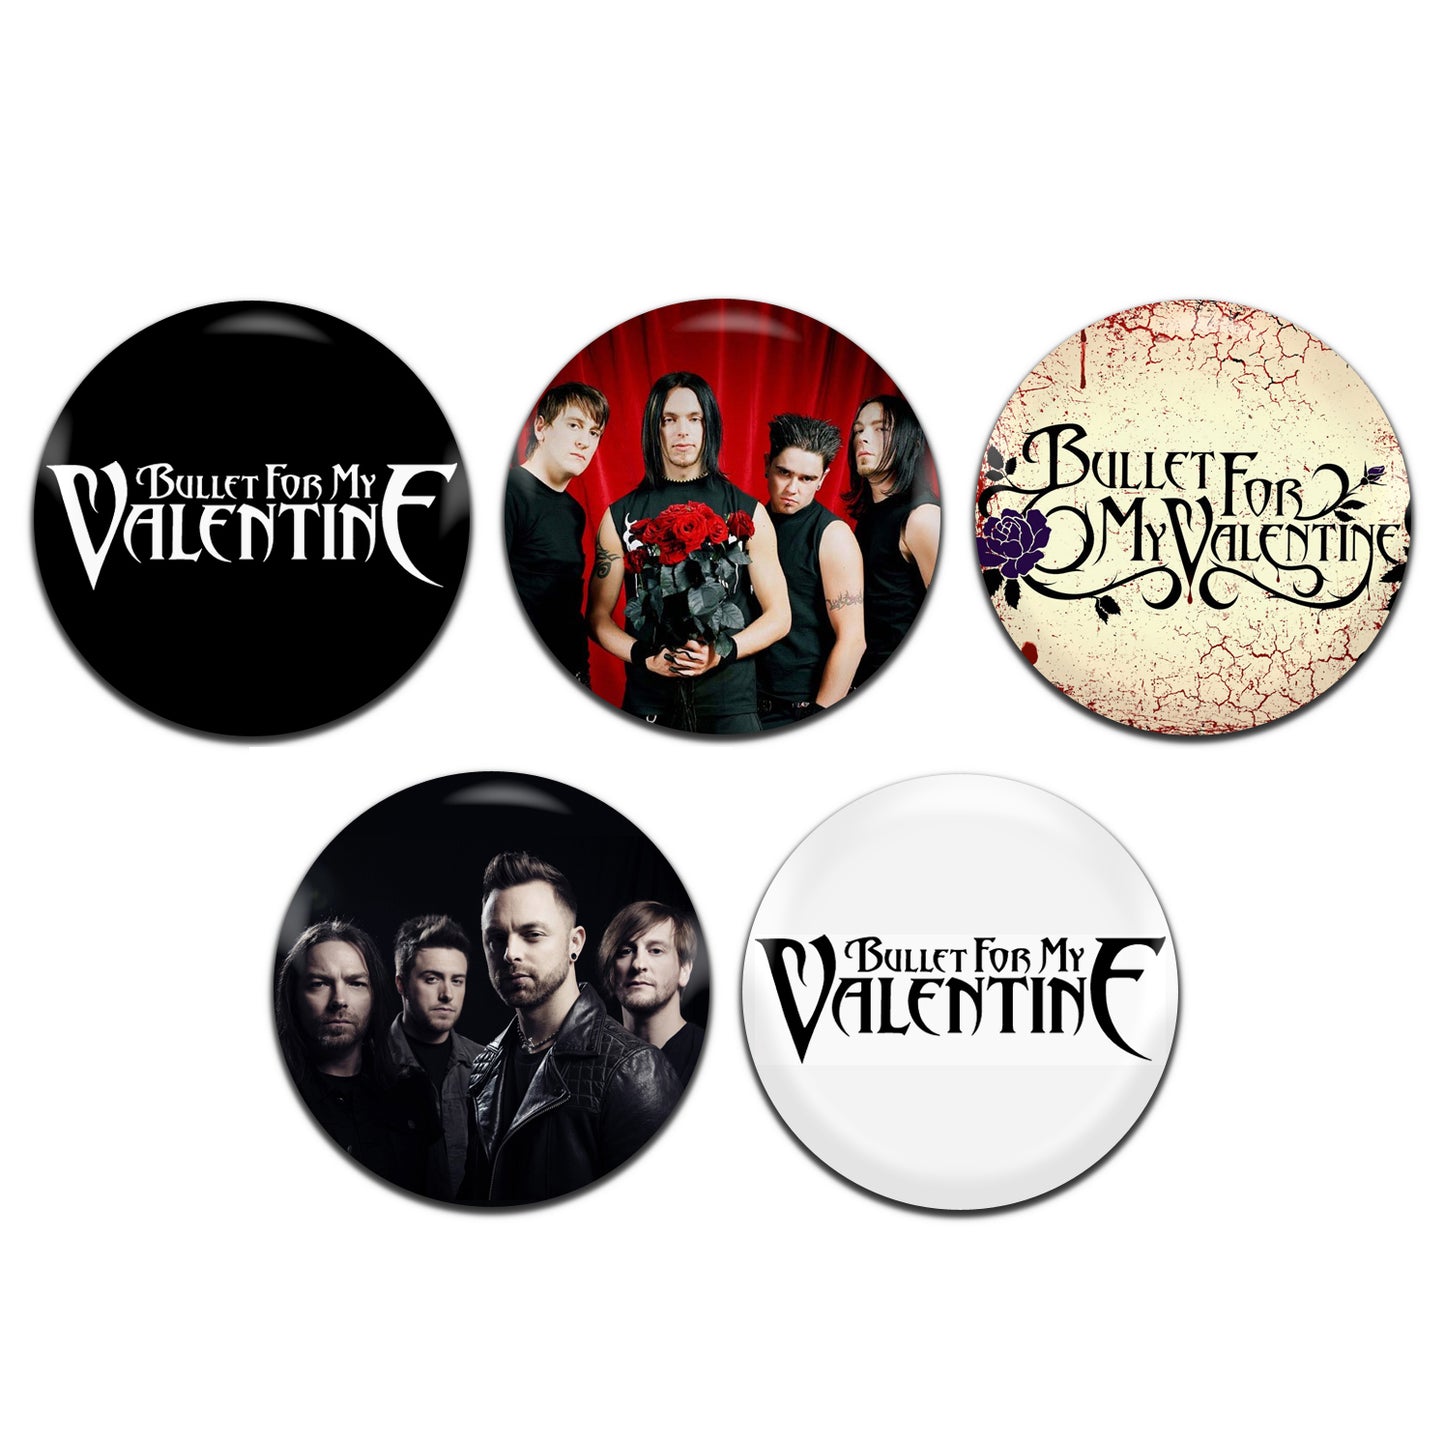 Bullet For My Valentine Metalcore Heavy Metal Rock Band 00's 25mm / 1 Inch D-Pin Button Badges (5x Set)